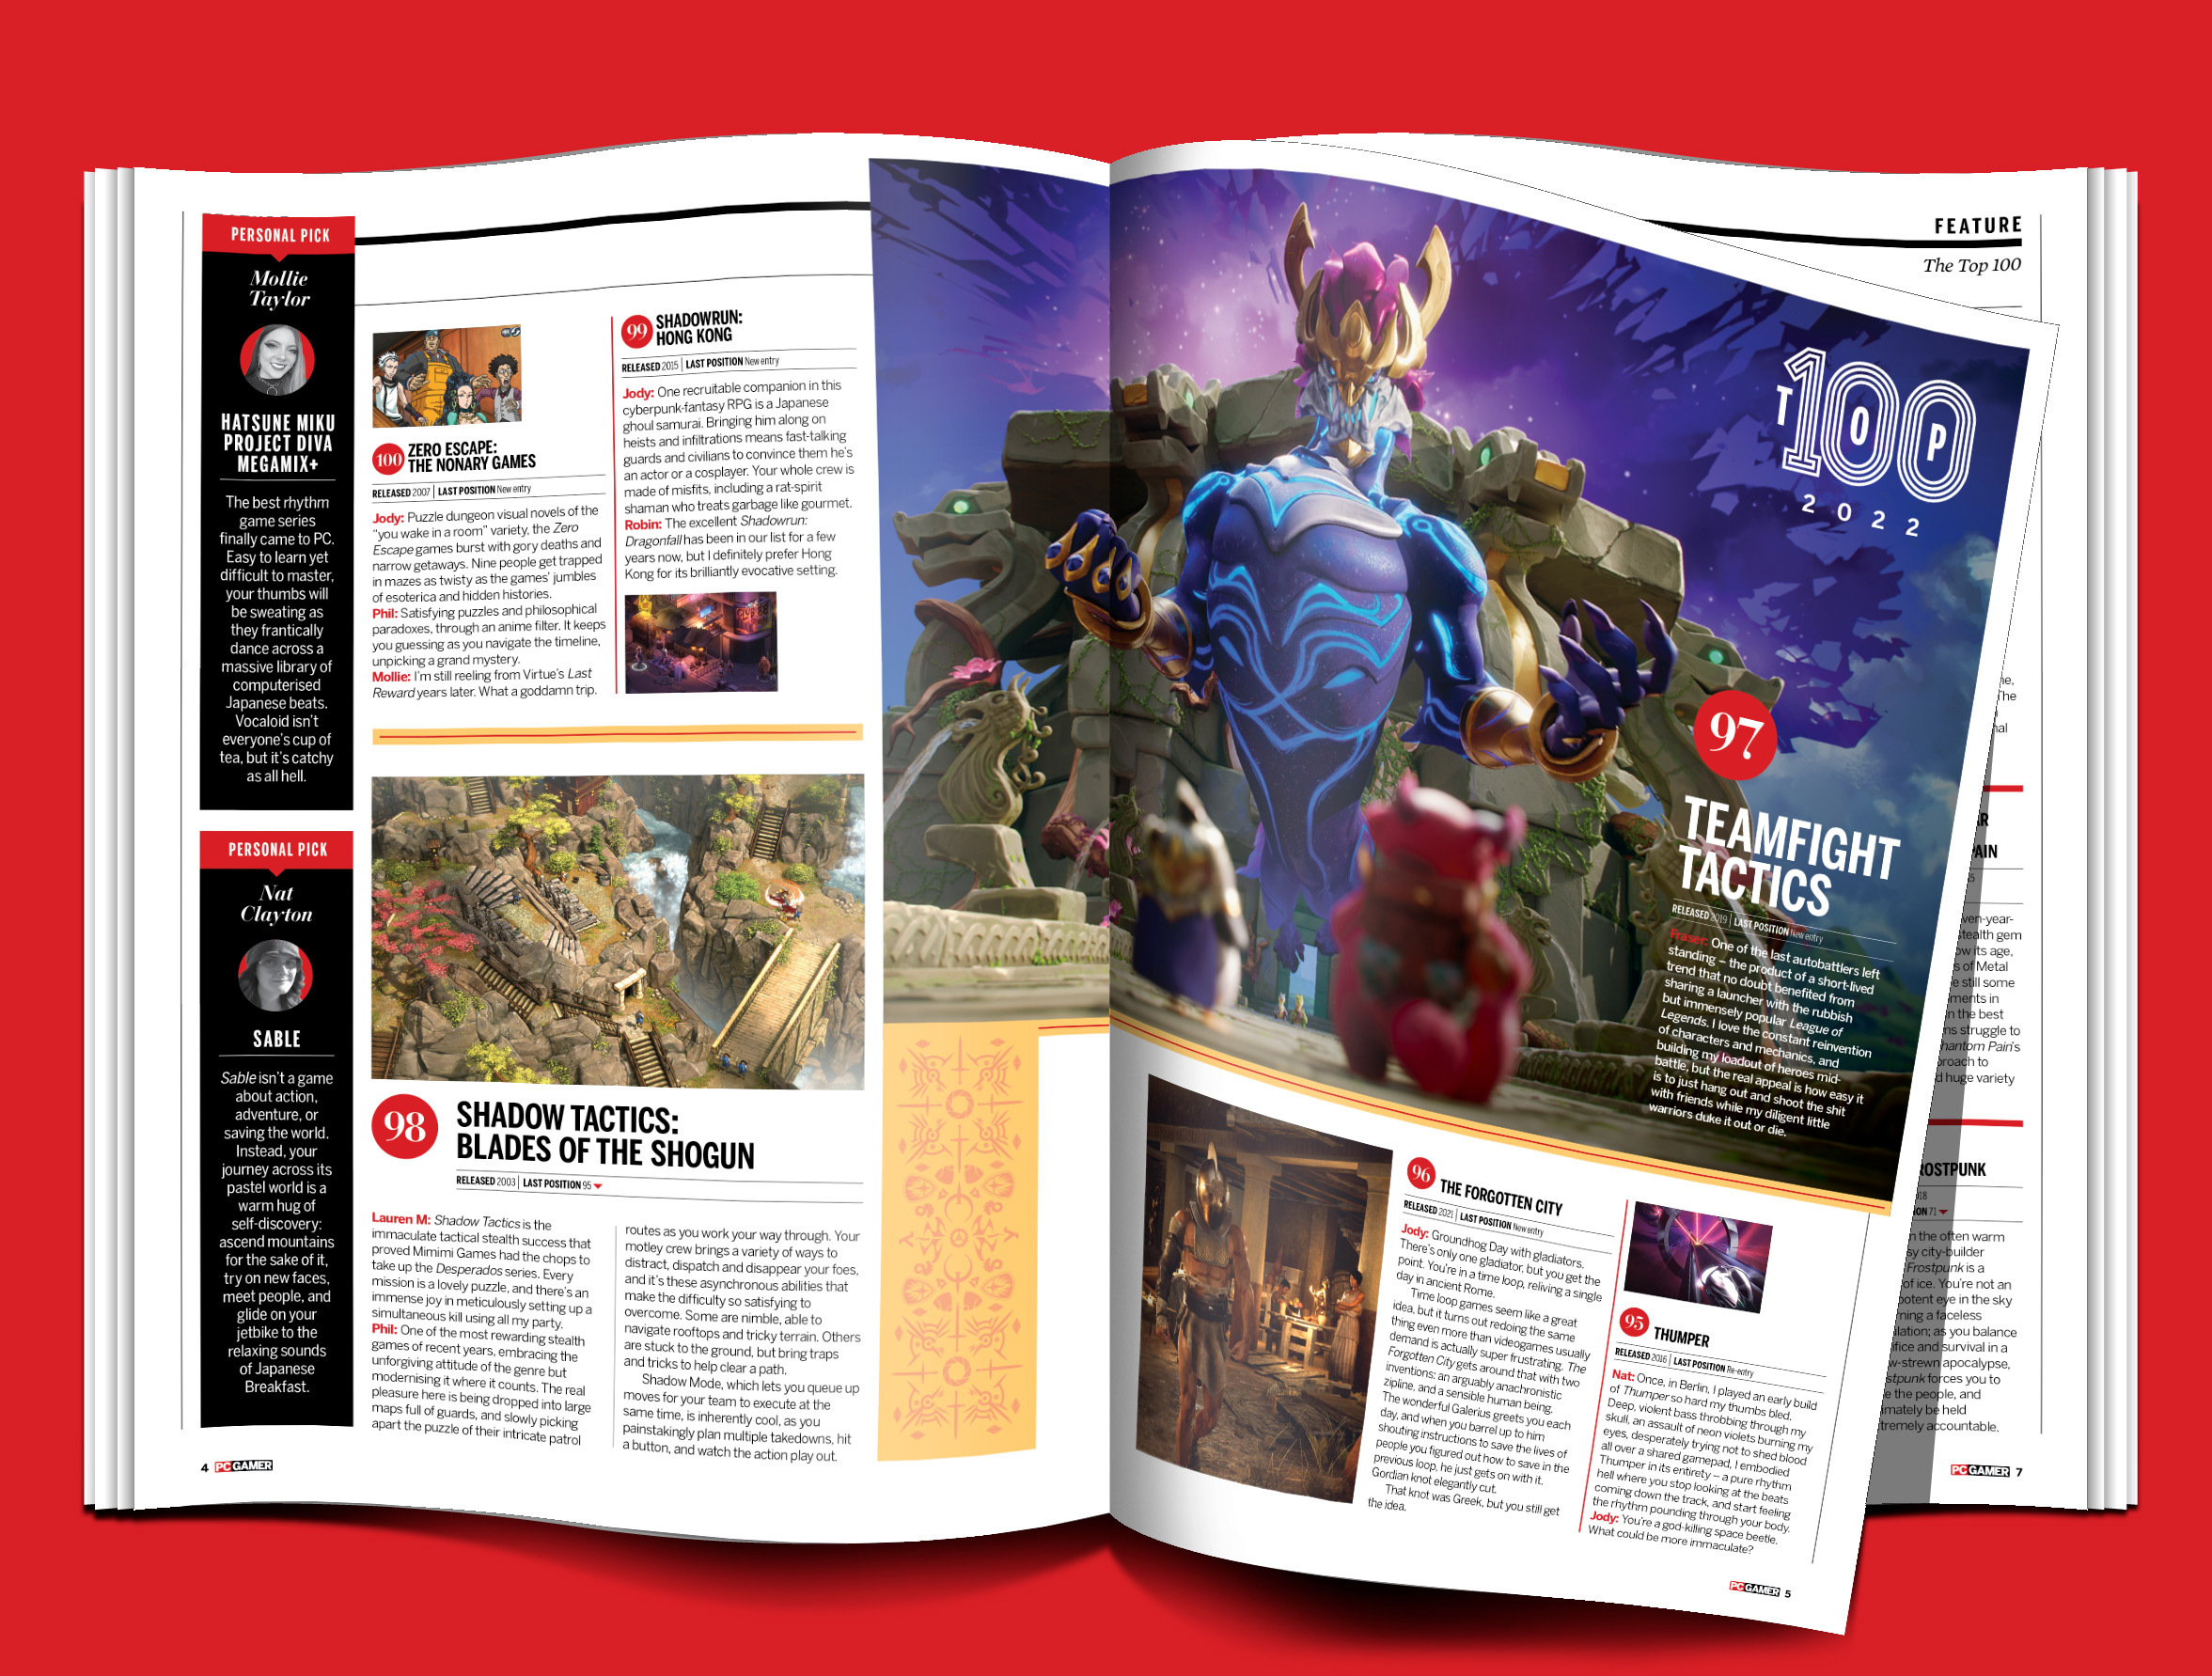 The PC Gamer Top 100 2022, showing games 100 to 93. Two personal picks are on the left-hand side.